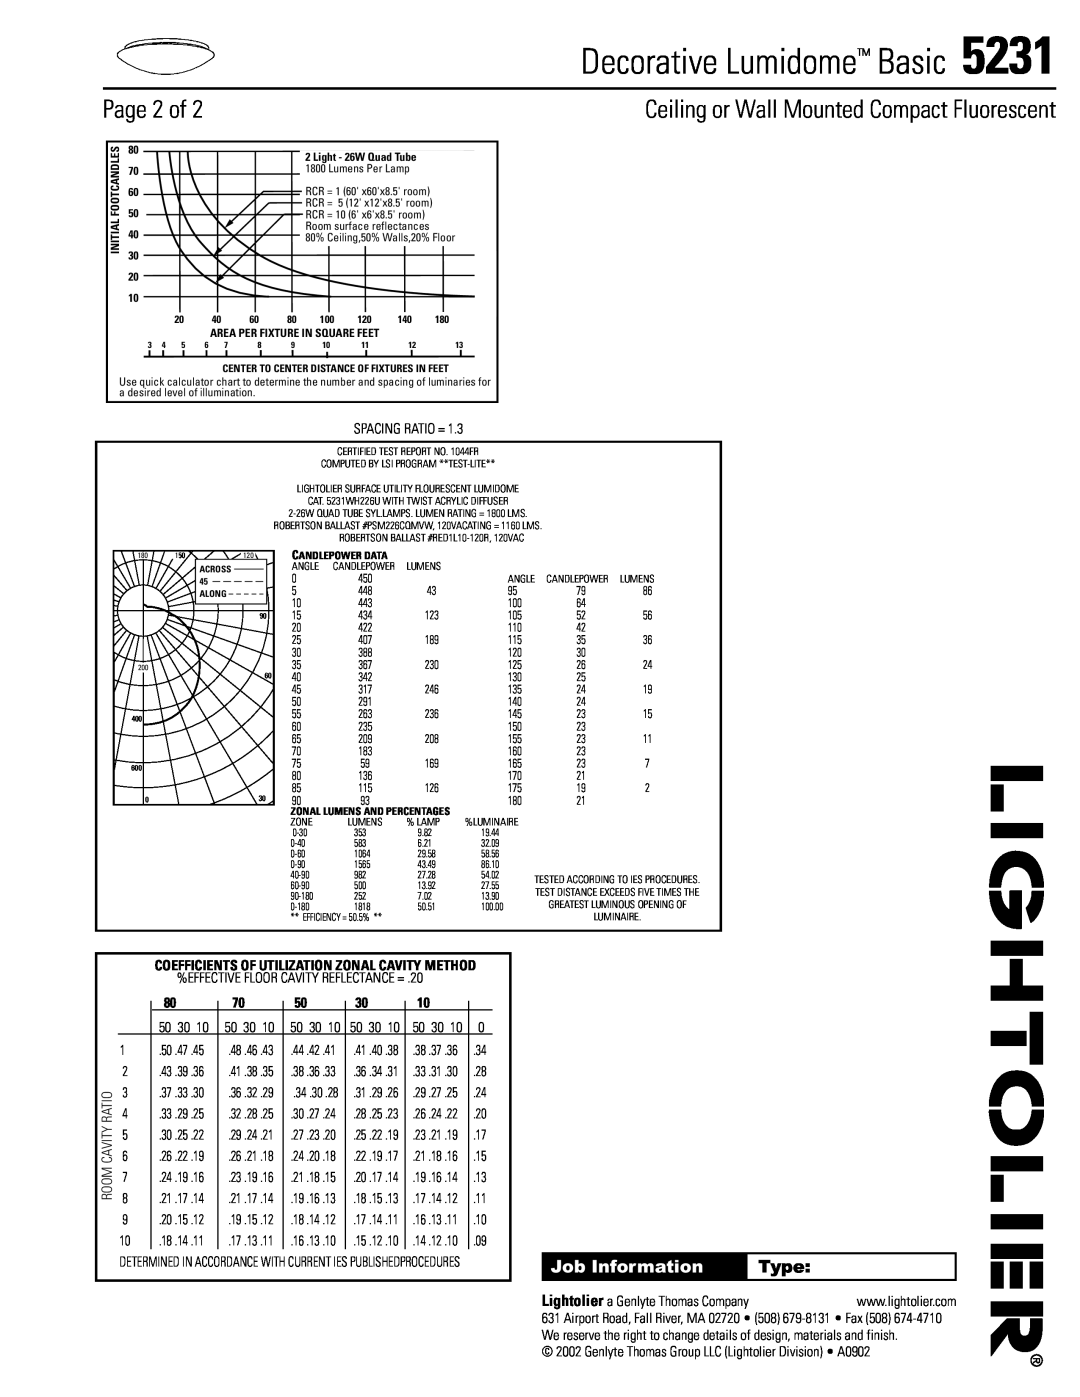 Lightolier 5231 Page 2 of, Decorative Lumidome Basic, Ceiling or Wall Mounted Compact Fluorescent, Job Information, Type 